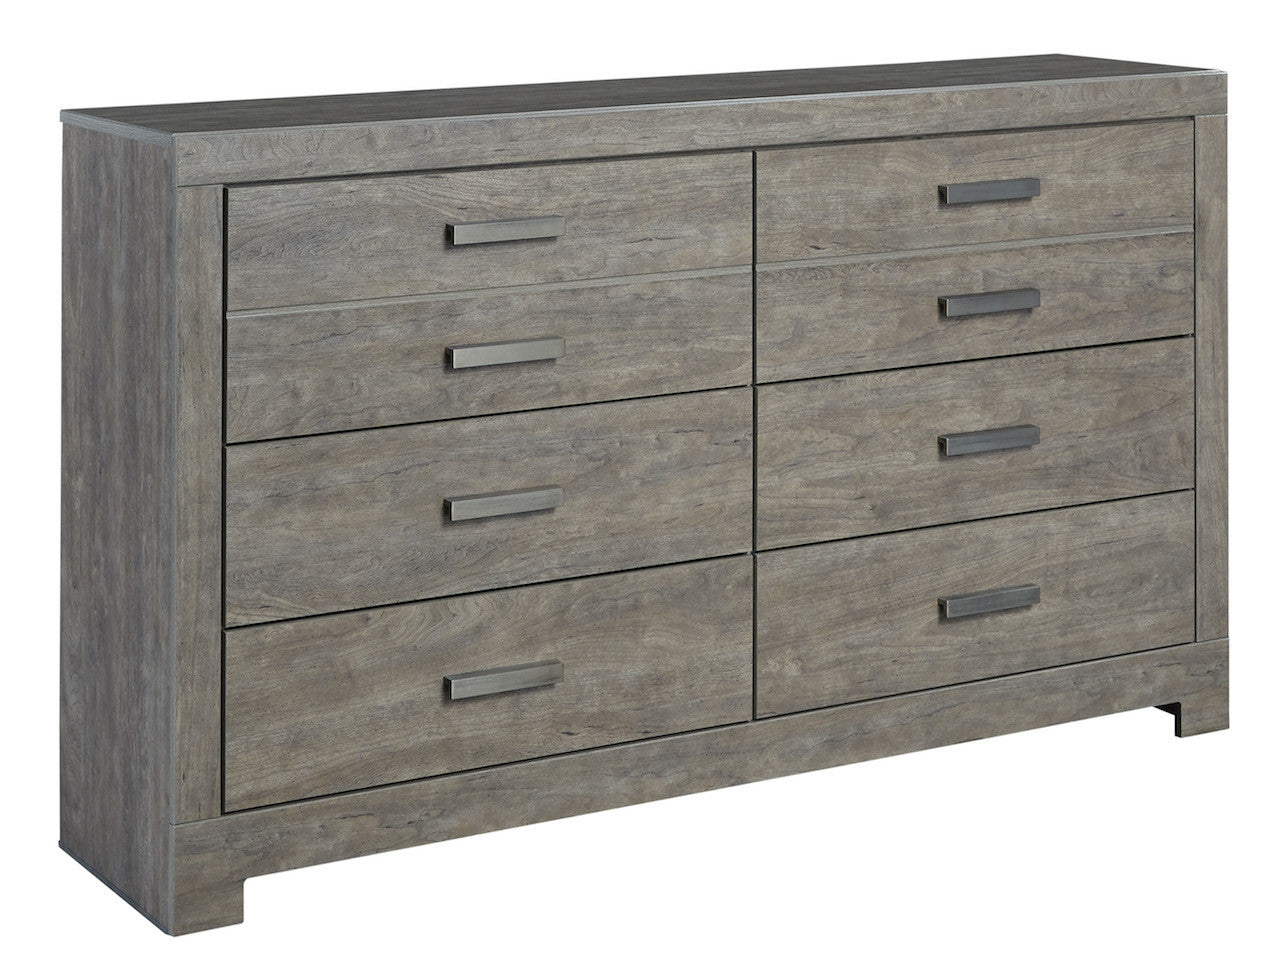 Ashley Culverbach Six Drawer Dresser Weathered Driftwood in Gray - The Furniture Space.